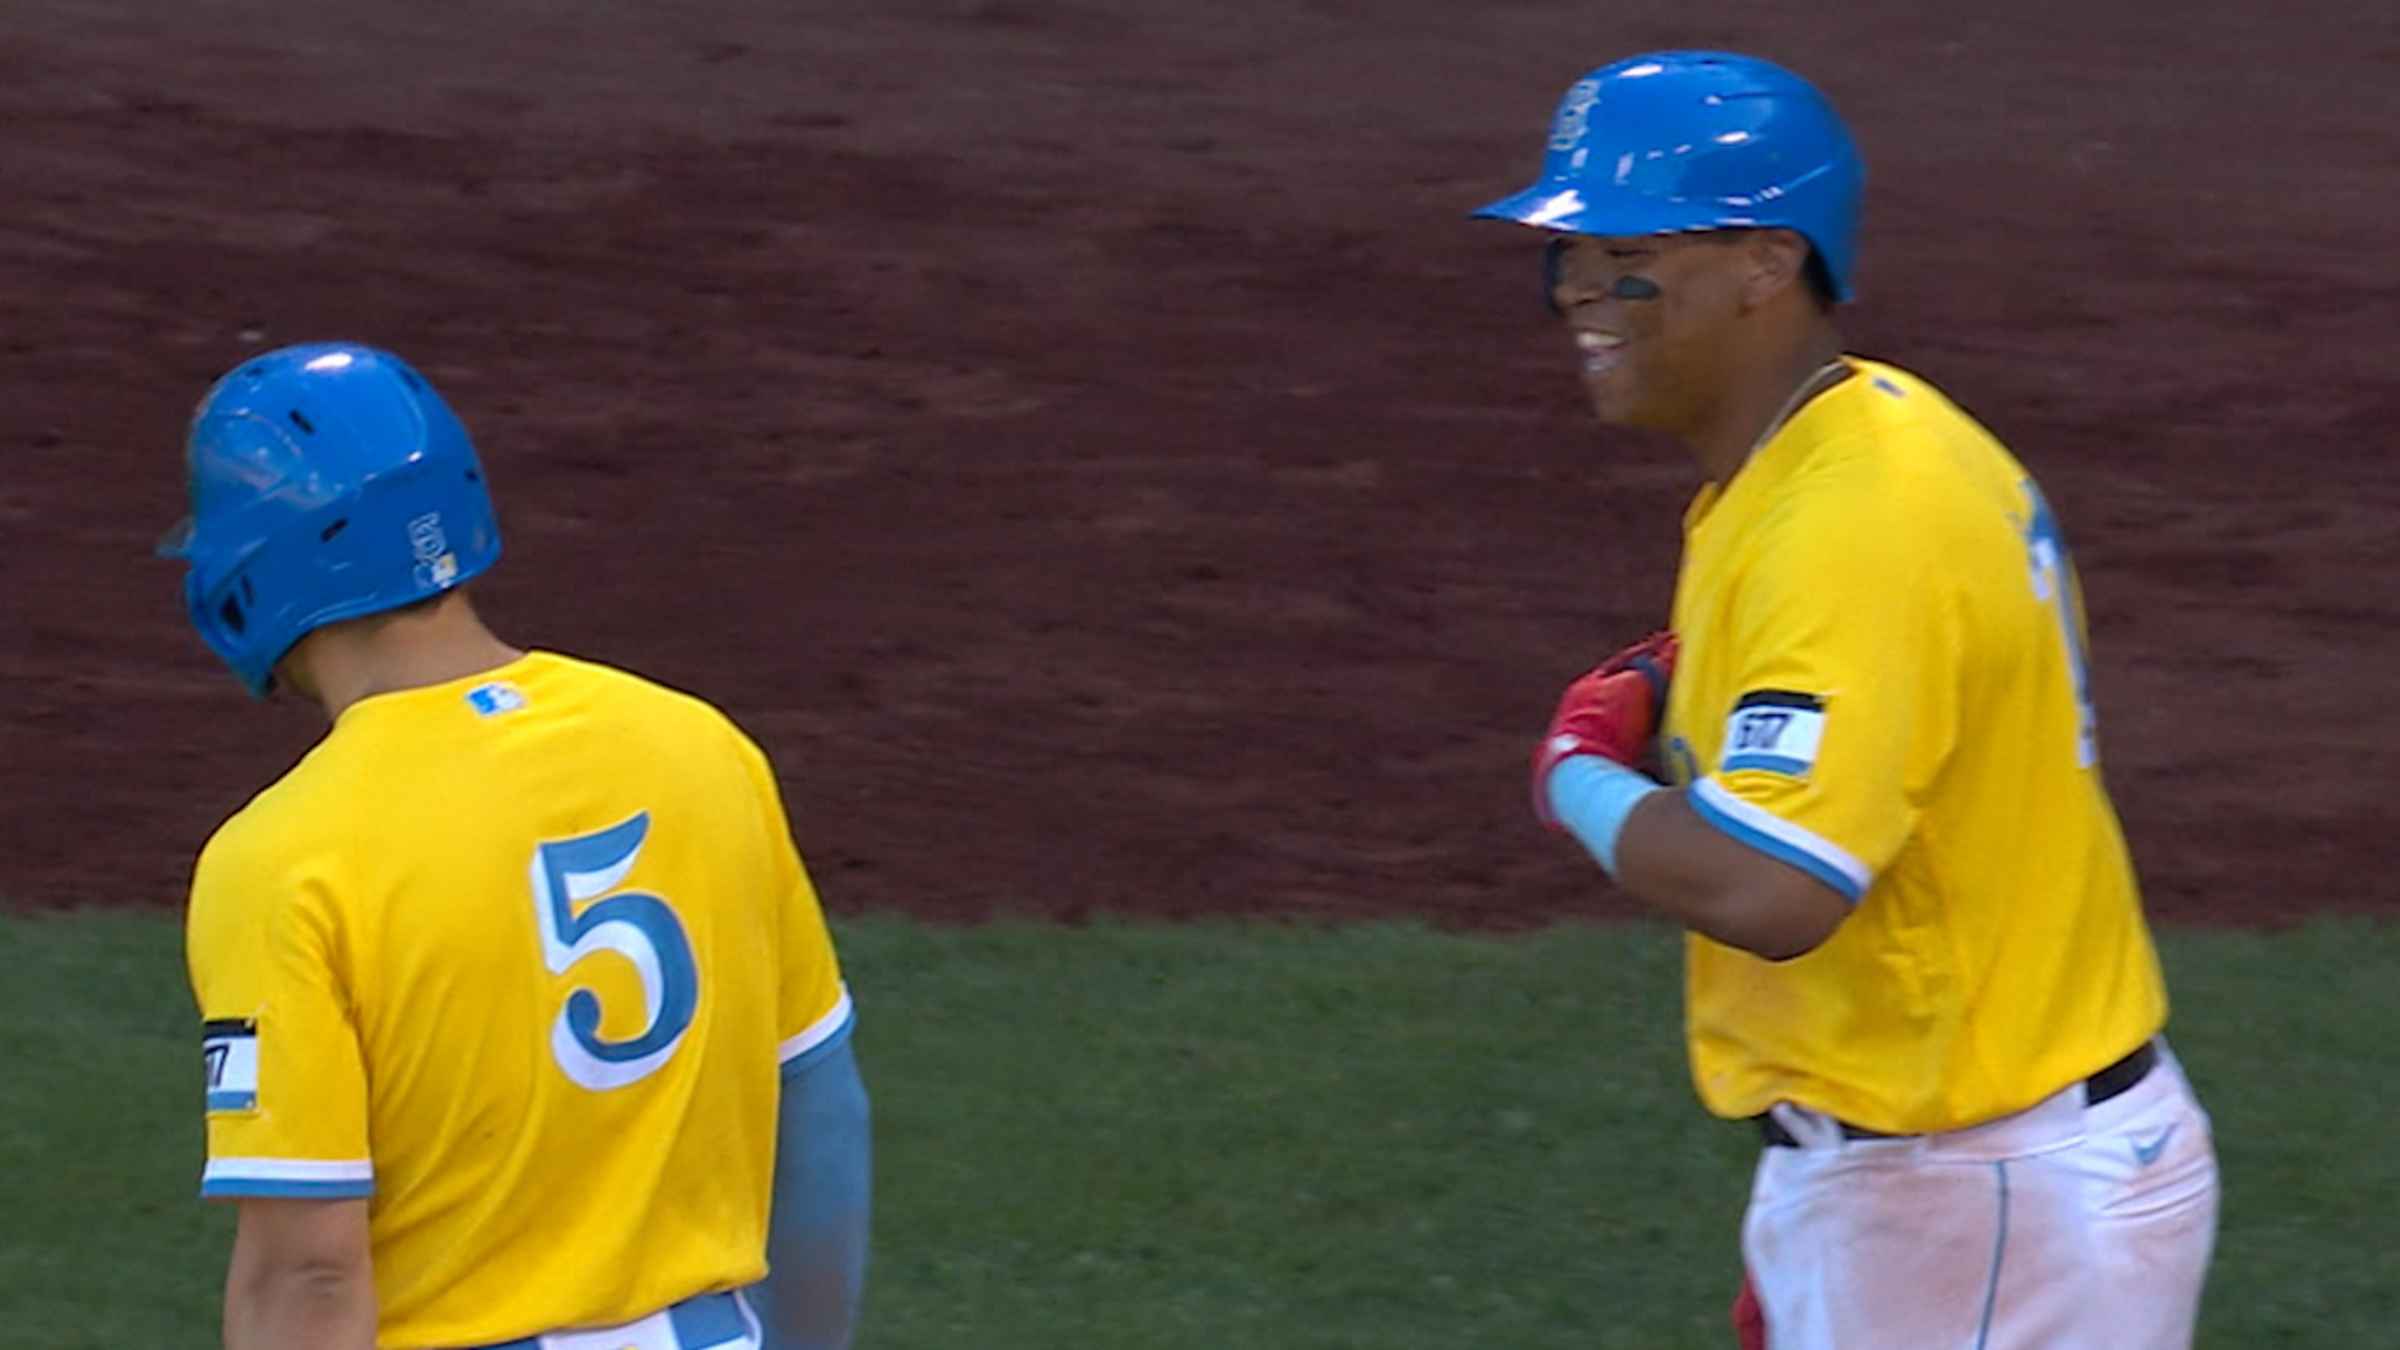 Boston Red Sox wearing yellow and blue uniforms for all three